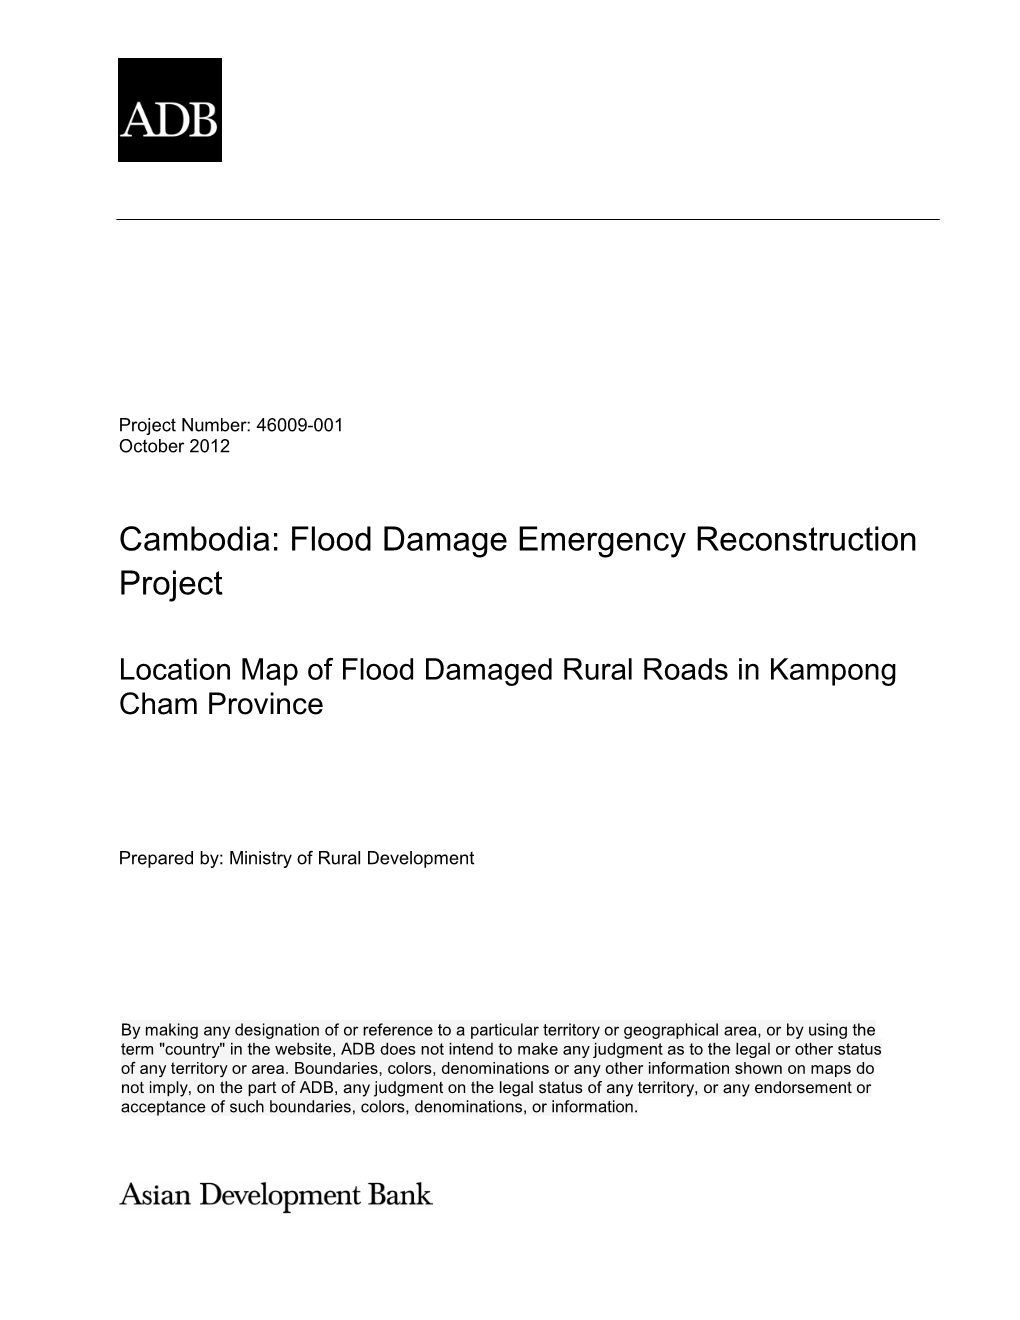 Location Map of Flood Damaged Rural Roads in Kampong Cham Province